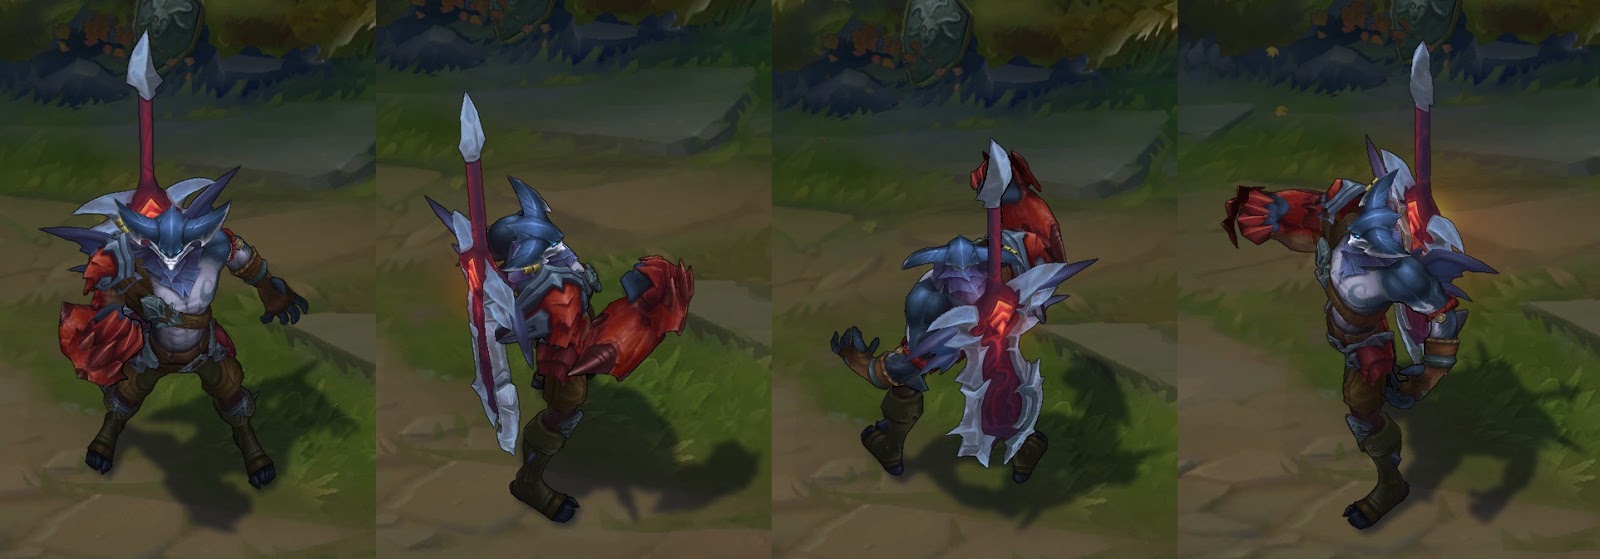 sea hunter aatrox skin for league of legends ingame picture